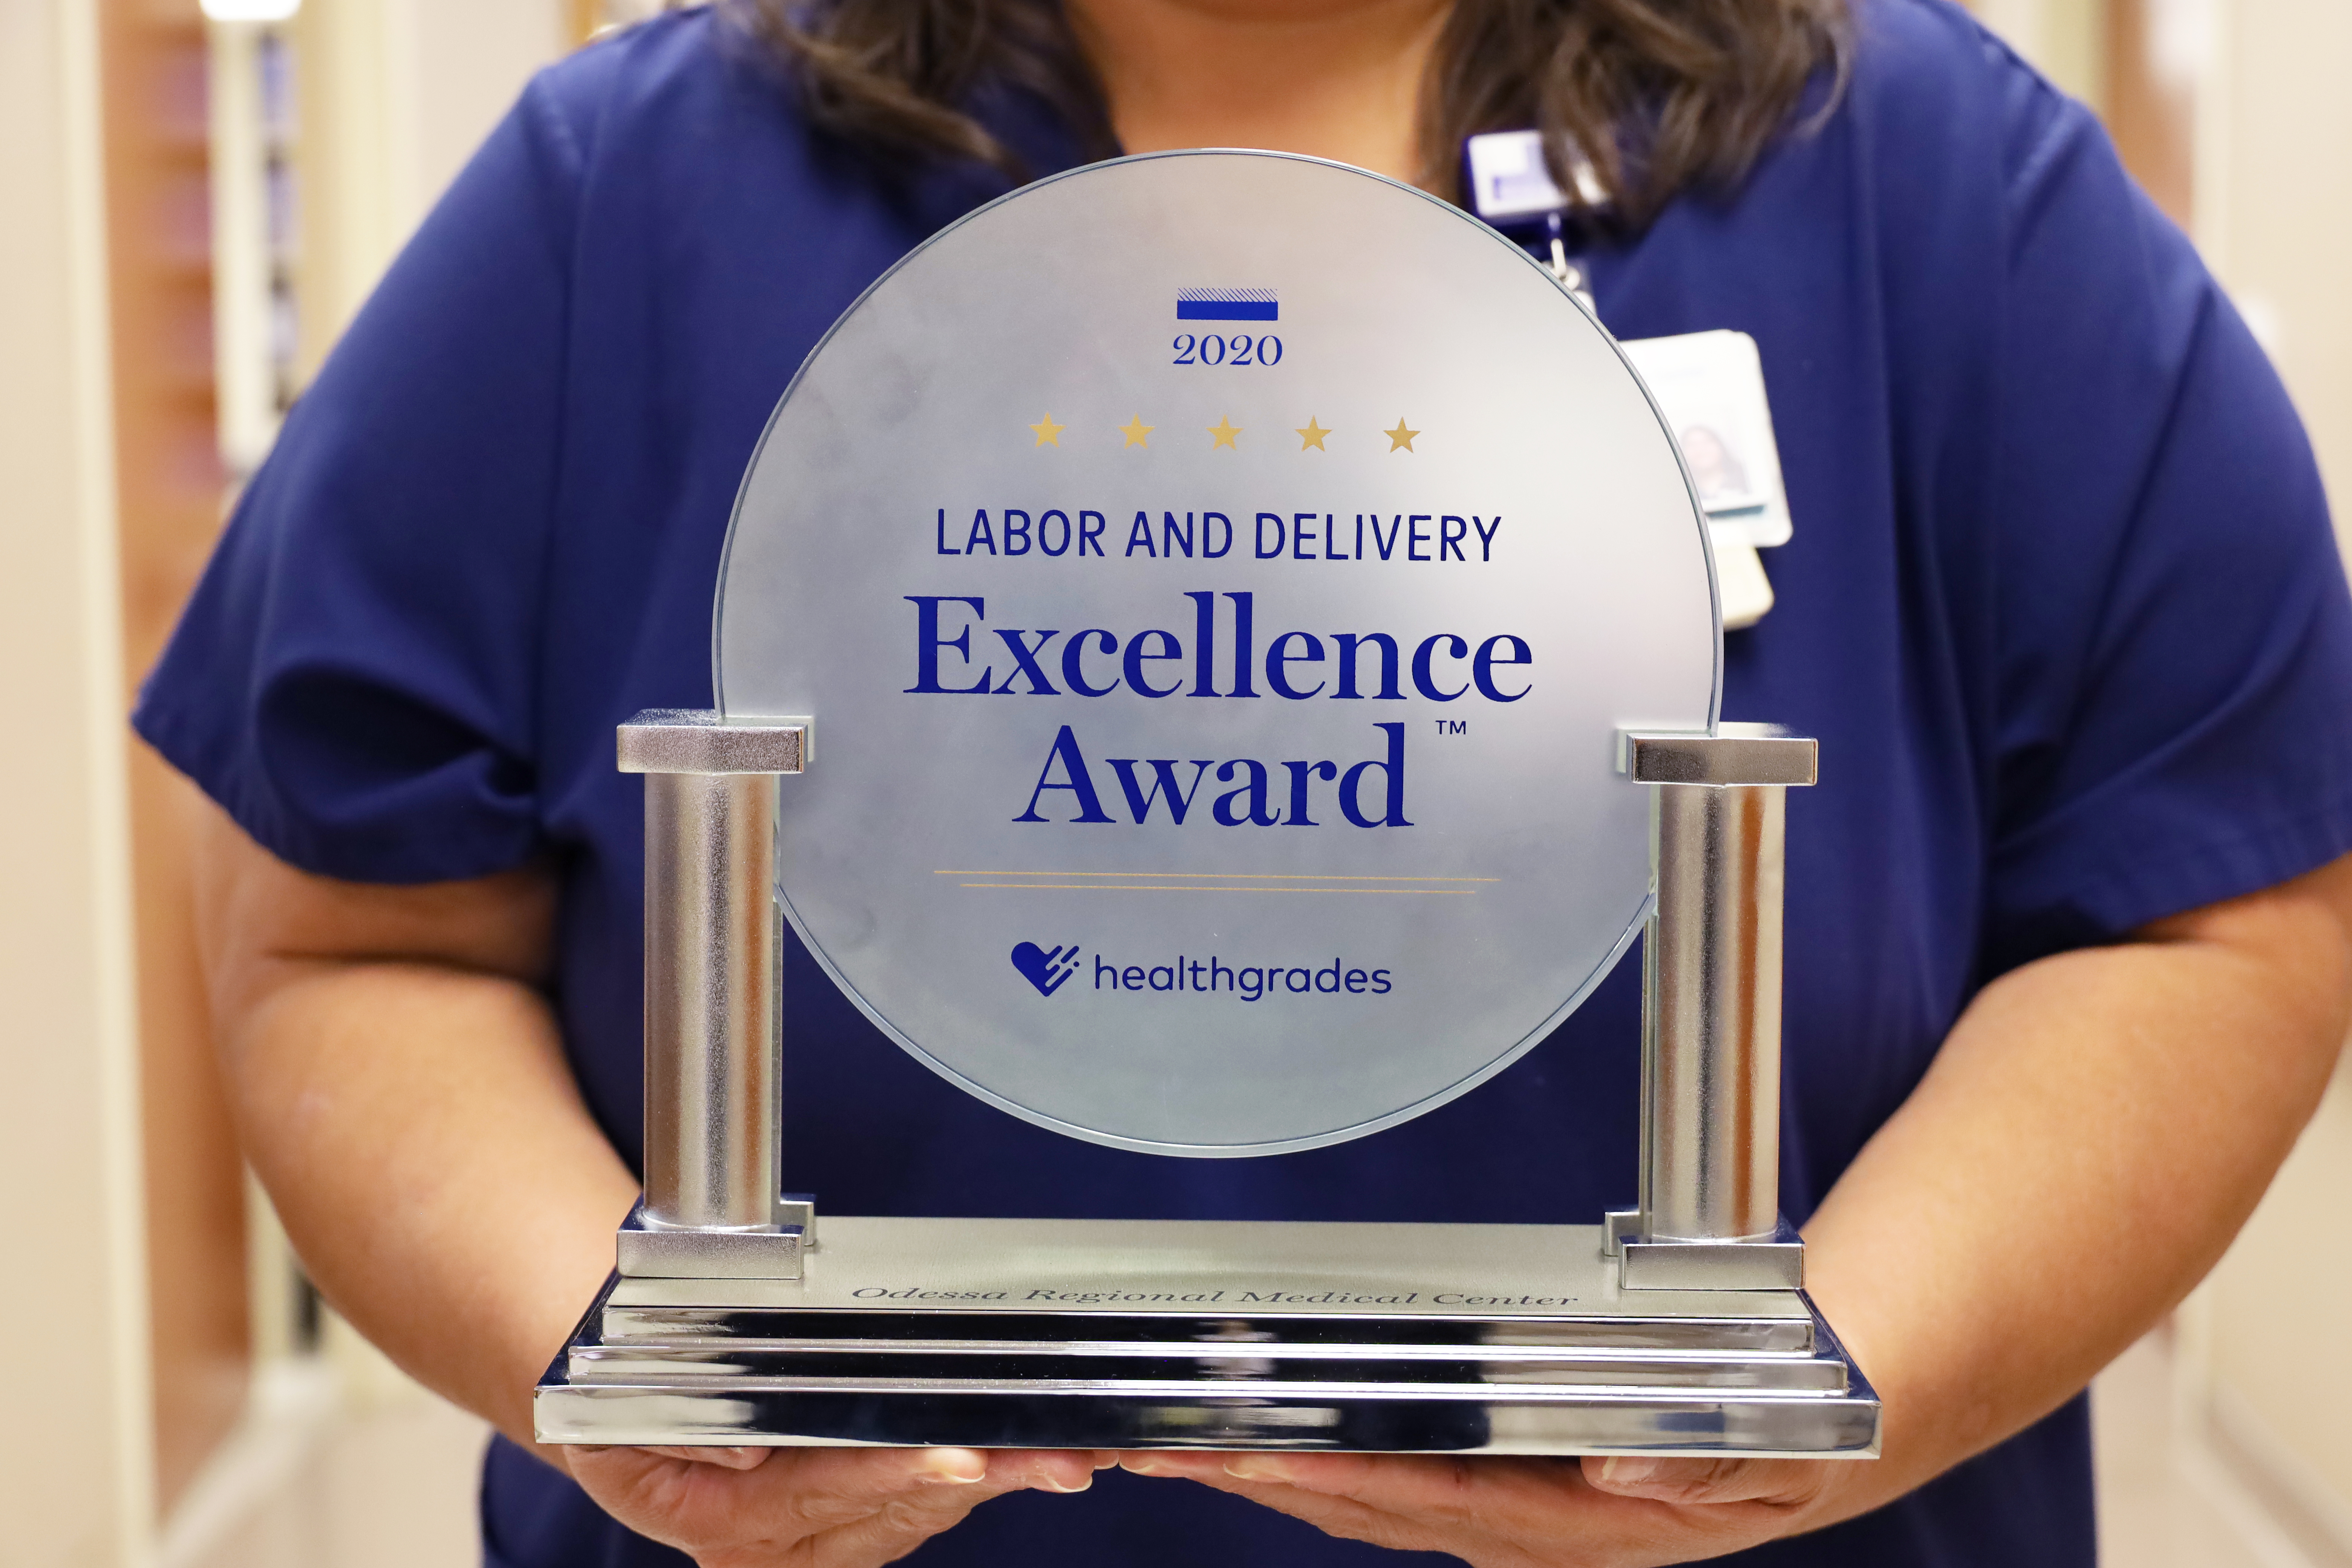 Odessa Regional Medical Center Achieves Healthgrades Labor and Delivery and Obstetrics and Gynecology Excellence Award™